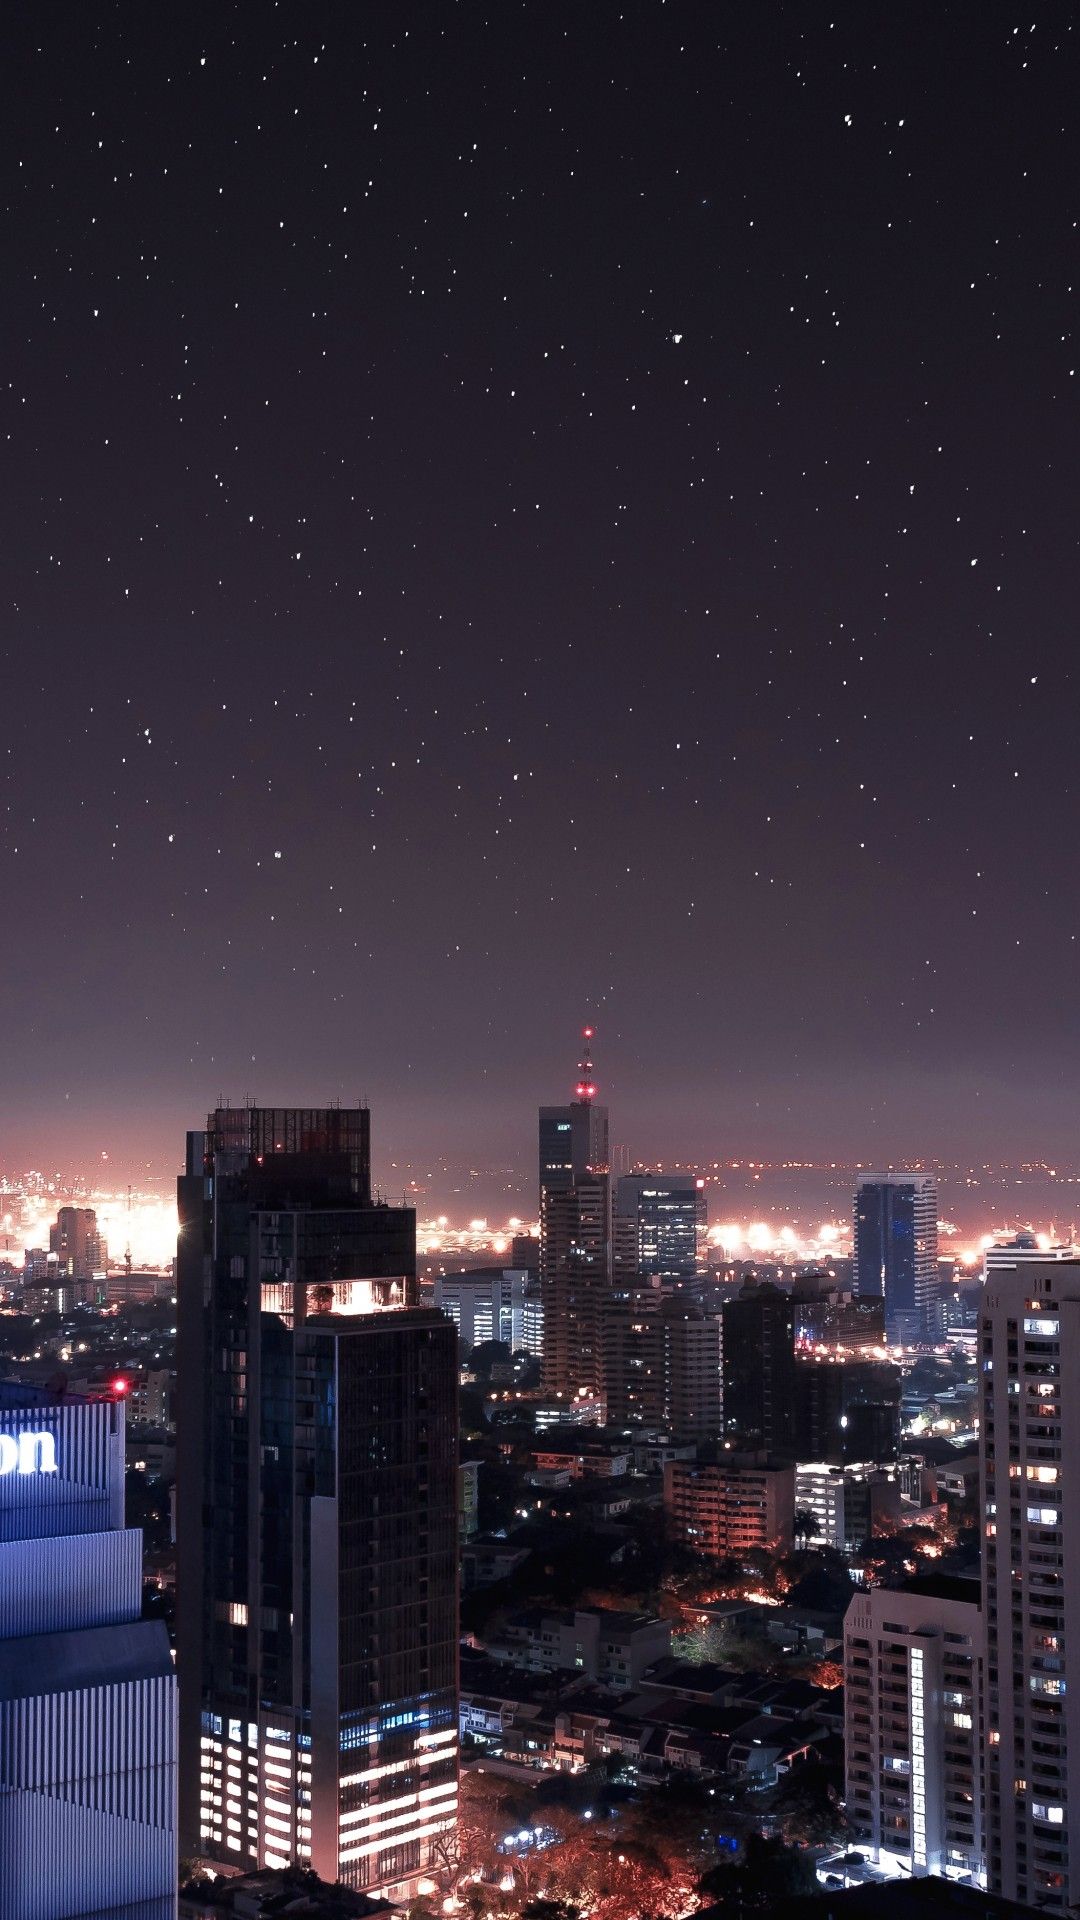 Night, Stars, Buildings, Skyscrapers, Cityscape. City aesthetic, Sky aesthetic, Beautiful wallpaper background